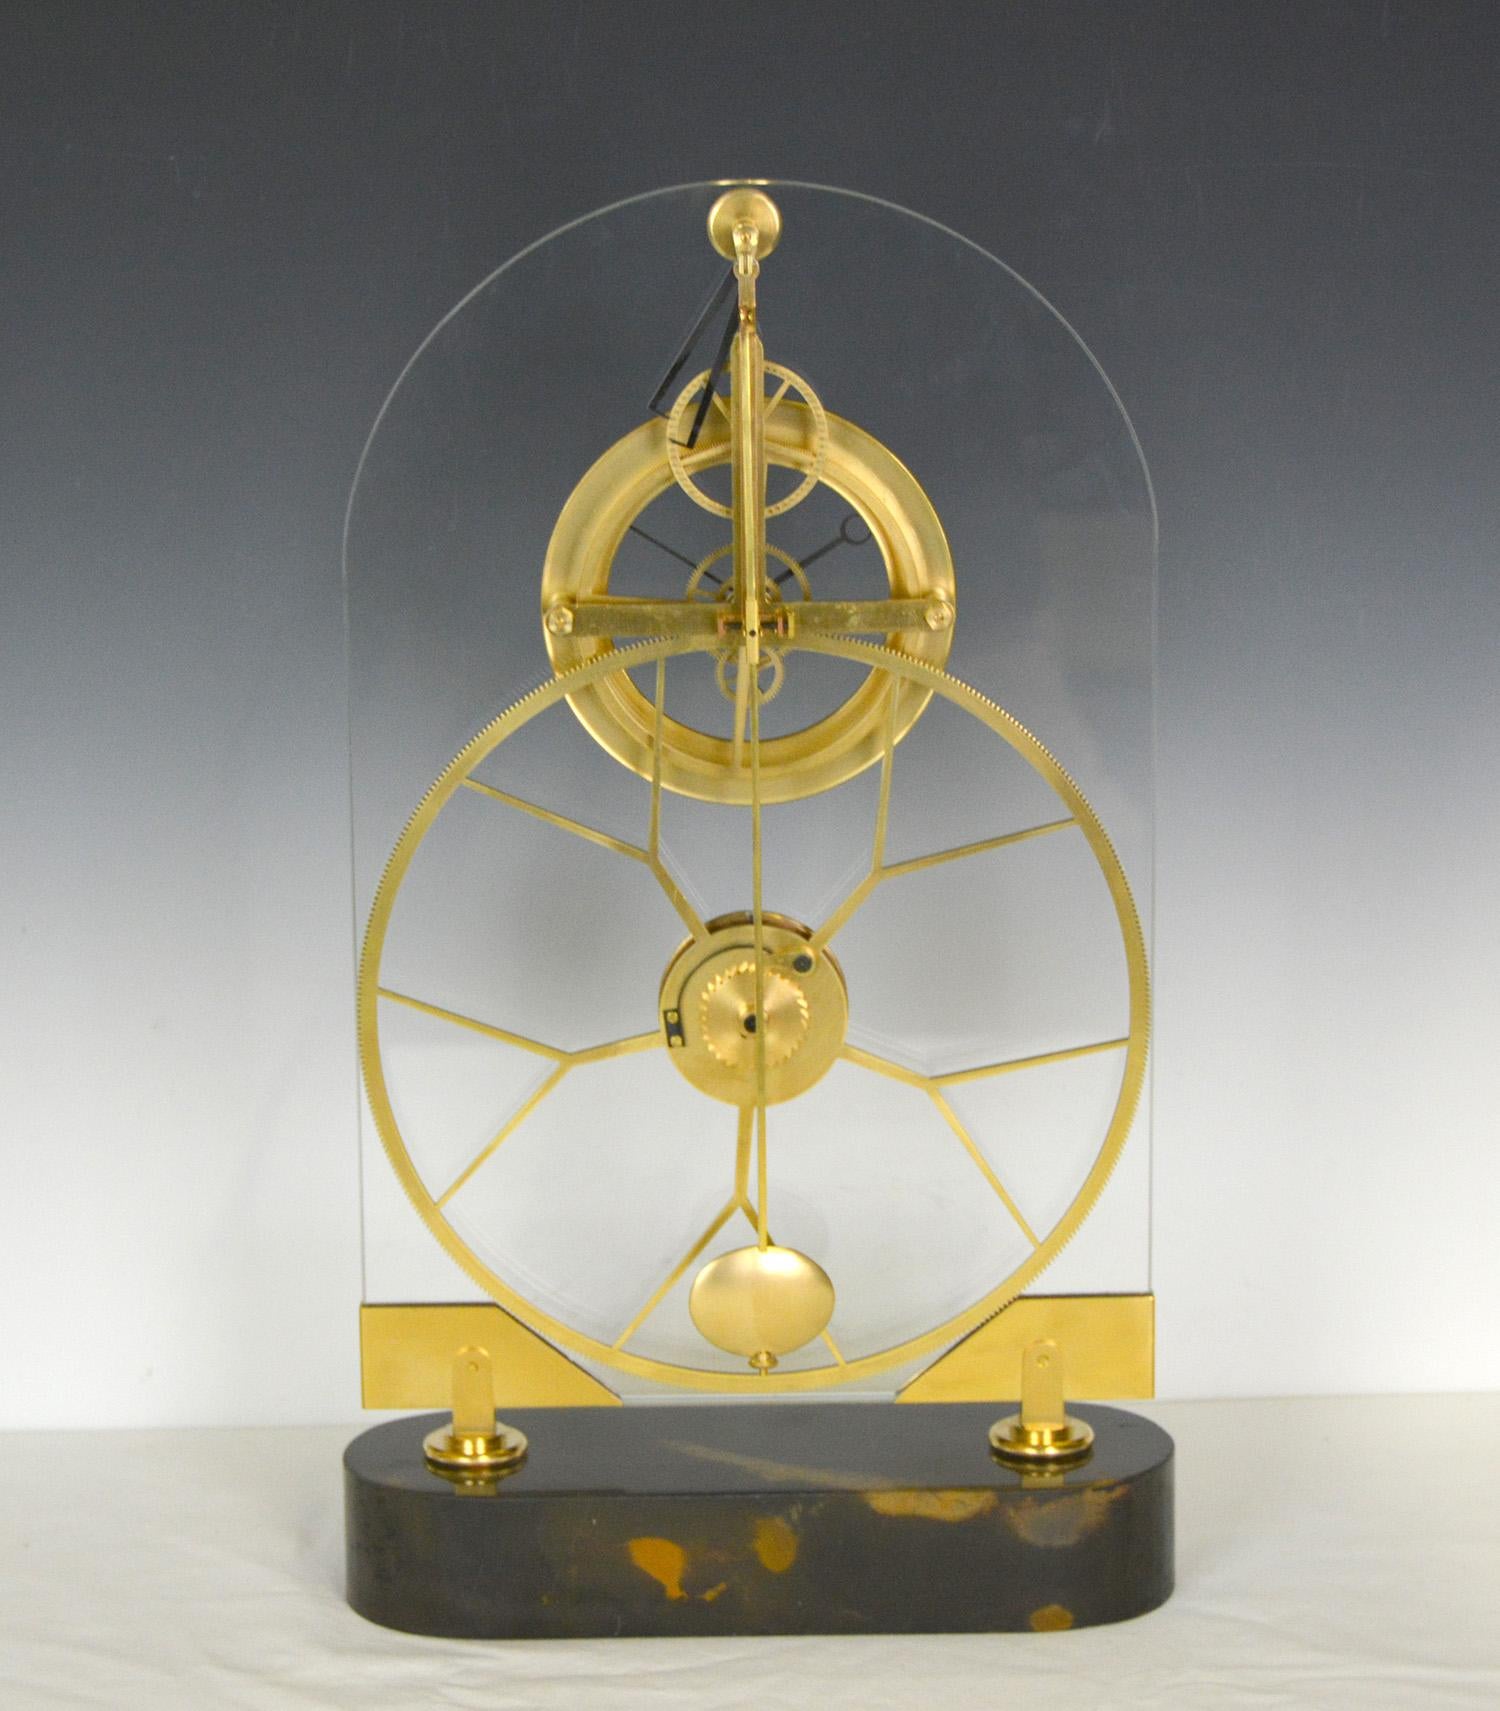 French Thin Glass Pinwheel Escapement Big Wheel Marble Base Skeleton Clock In Excellent Condition For Sale In Danville, CA